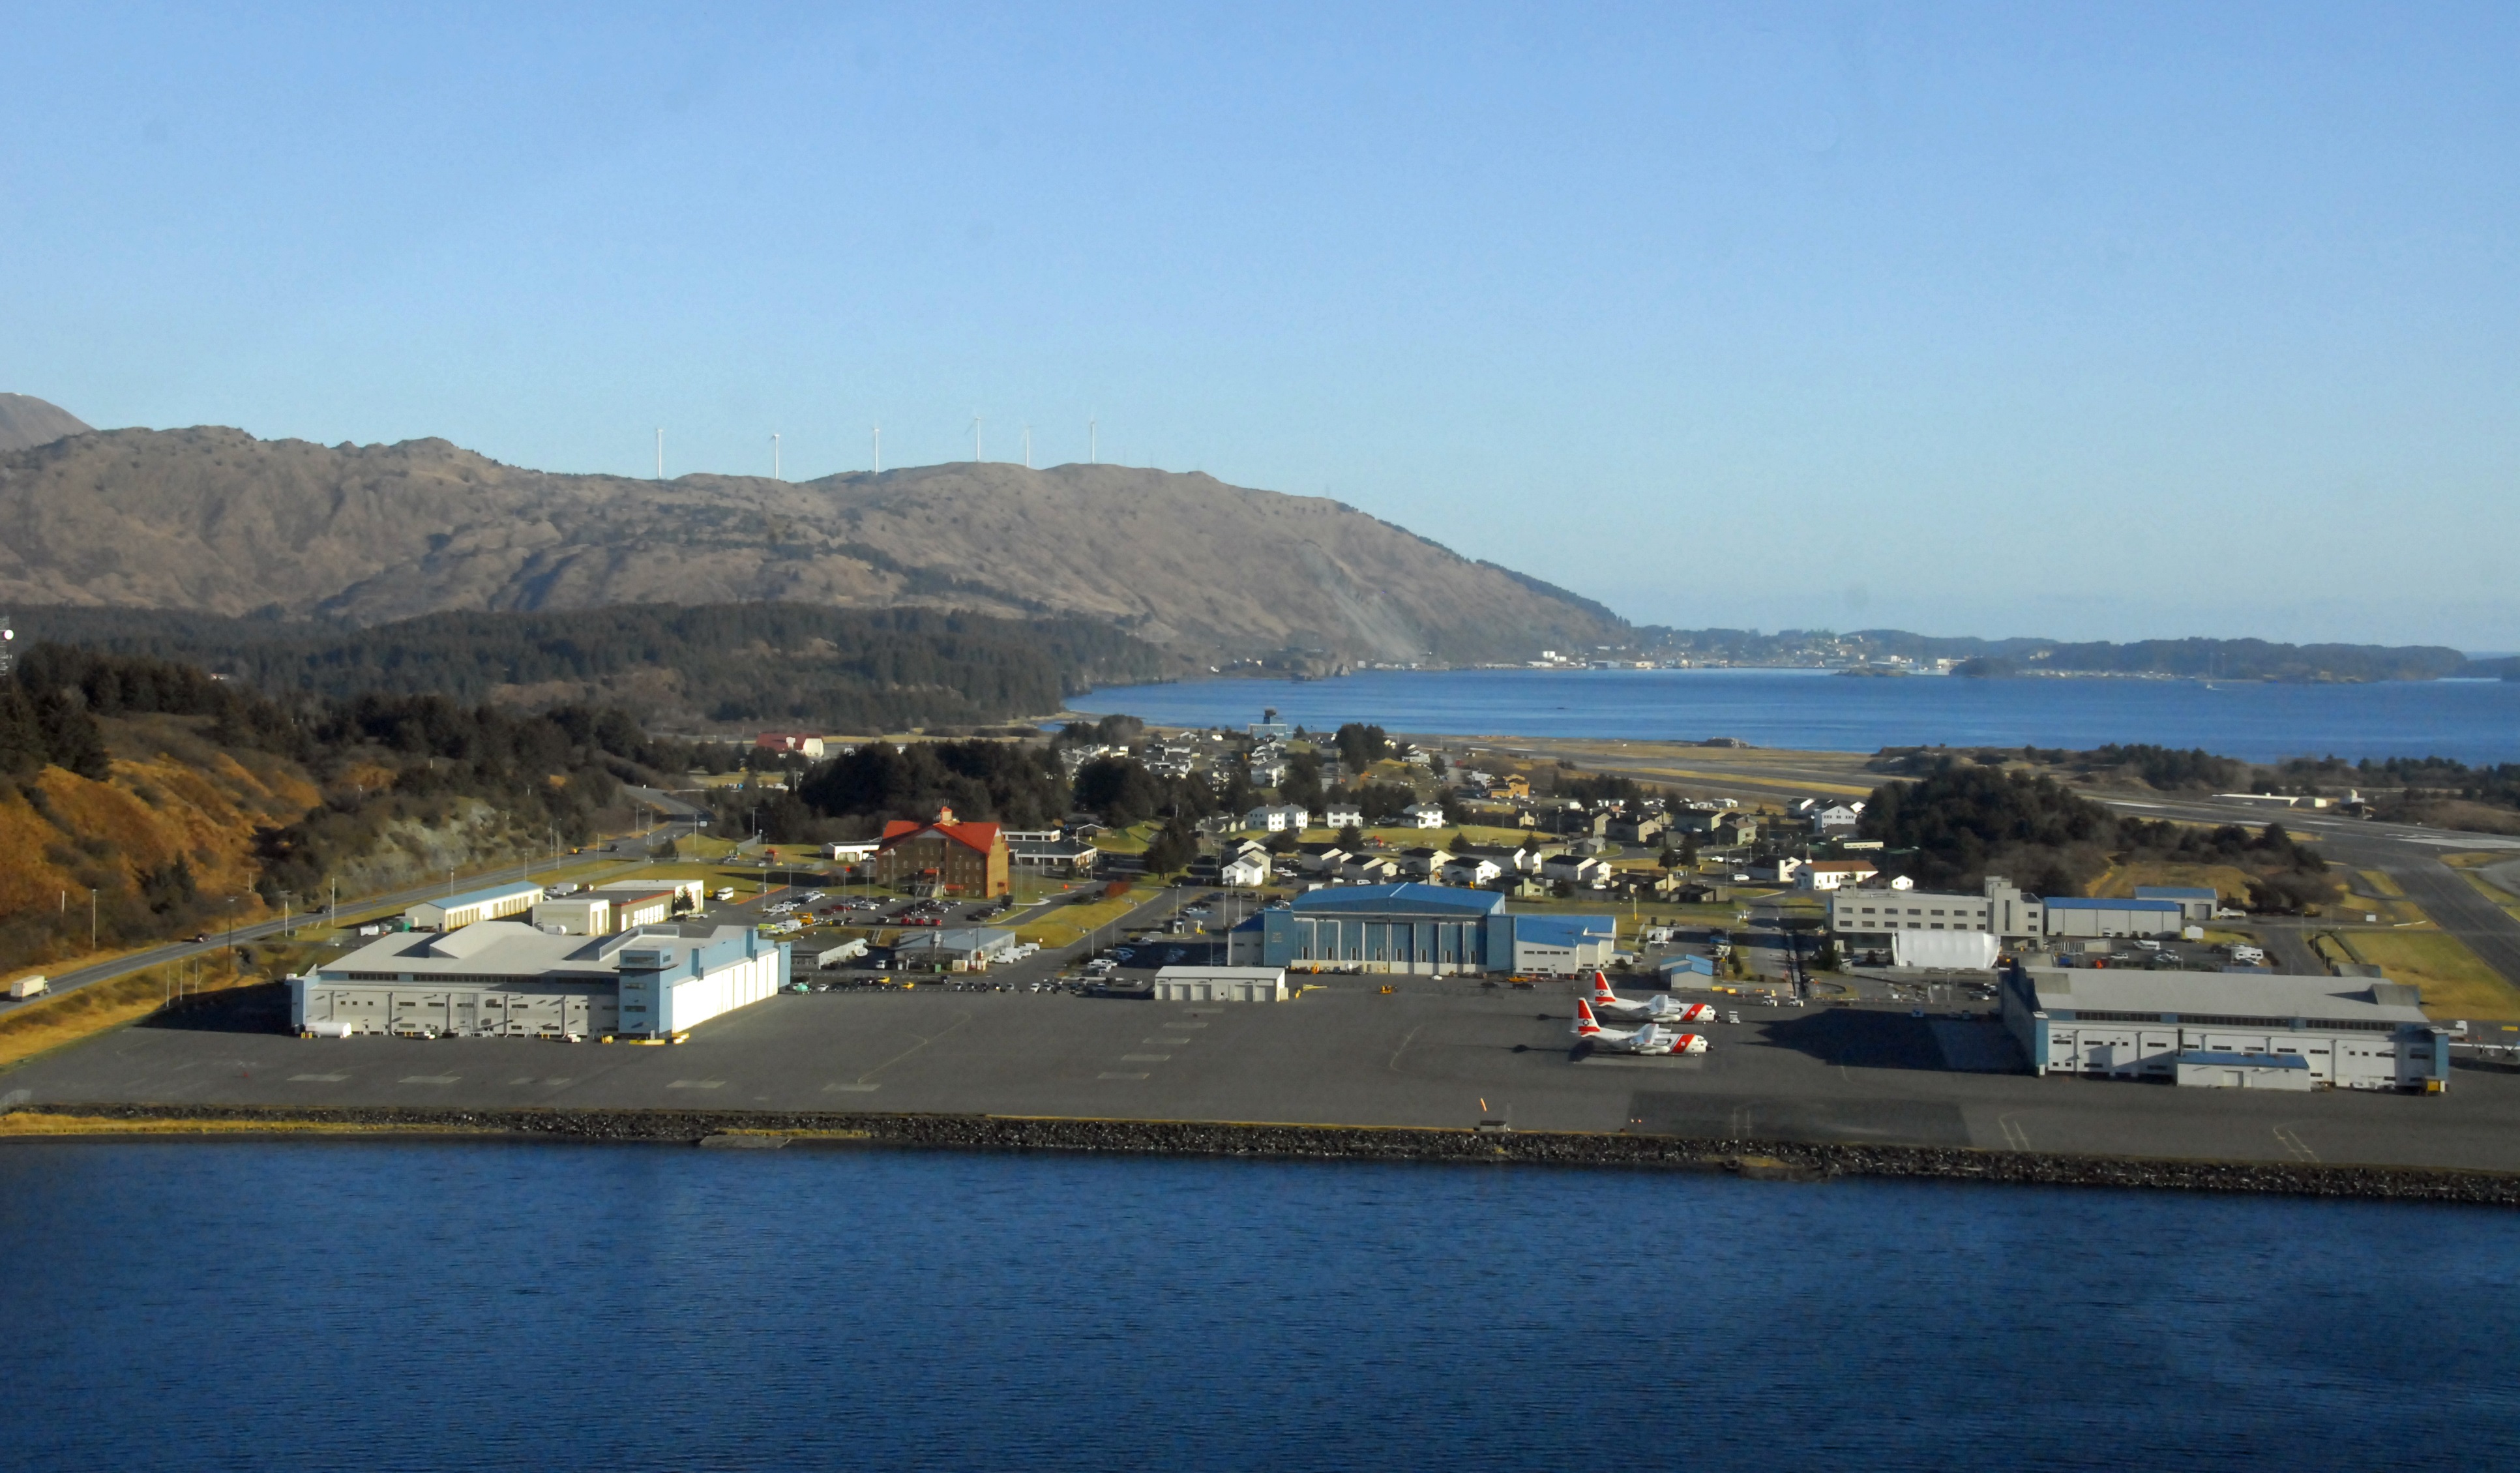 10.	A recent photograph showing the waterfront location of Coast Guard hangars at Air Station Kodiak. (Wikimedia)